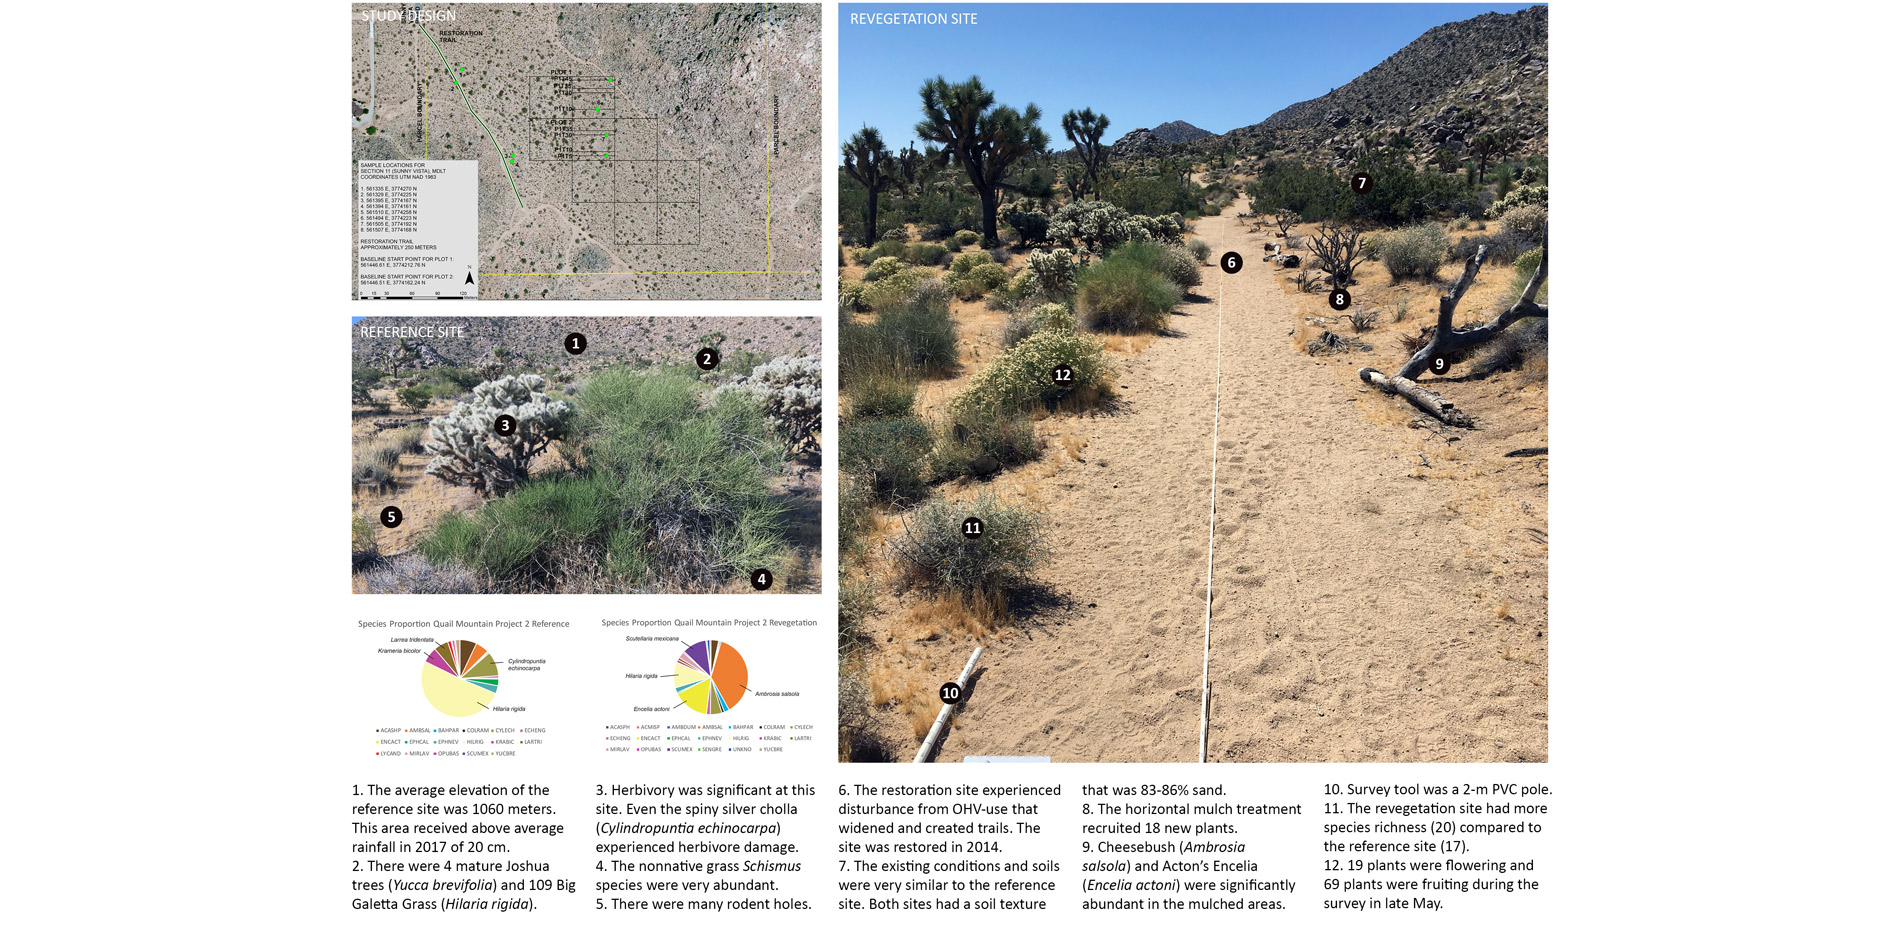 Quail Mountain Project 2 revegetation site was restored in 2014 with mulch treatments by the Mojave Desert Land Trust.…